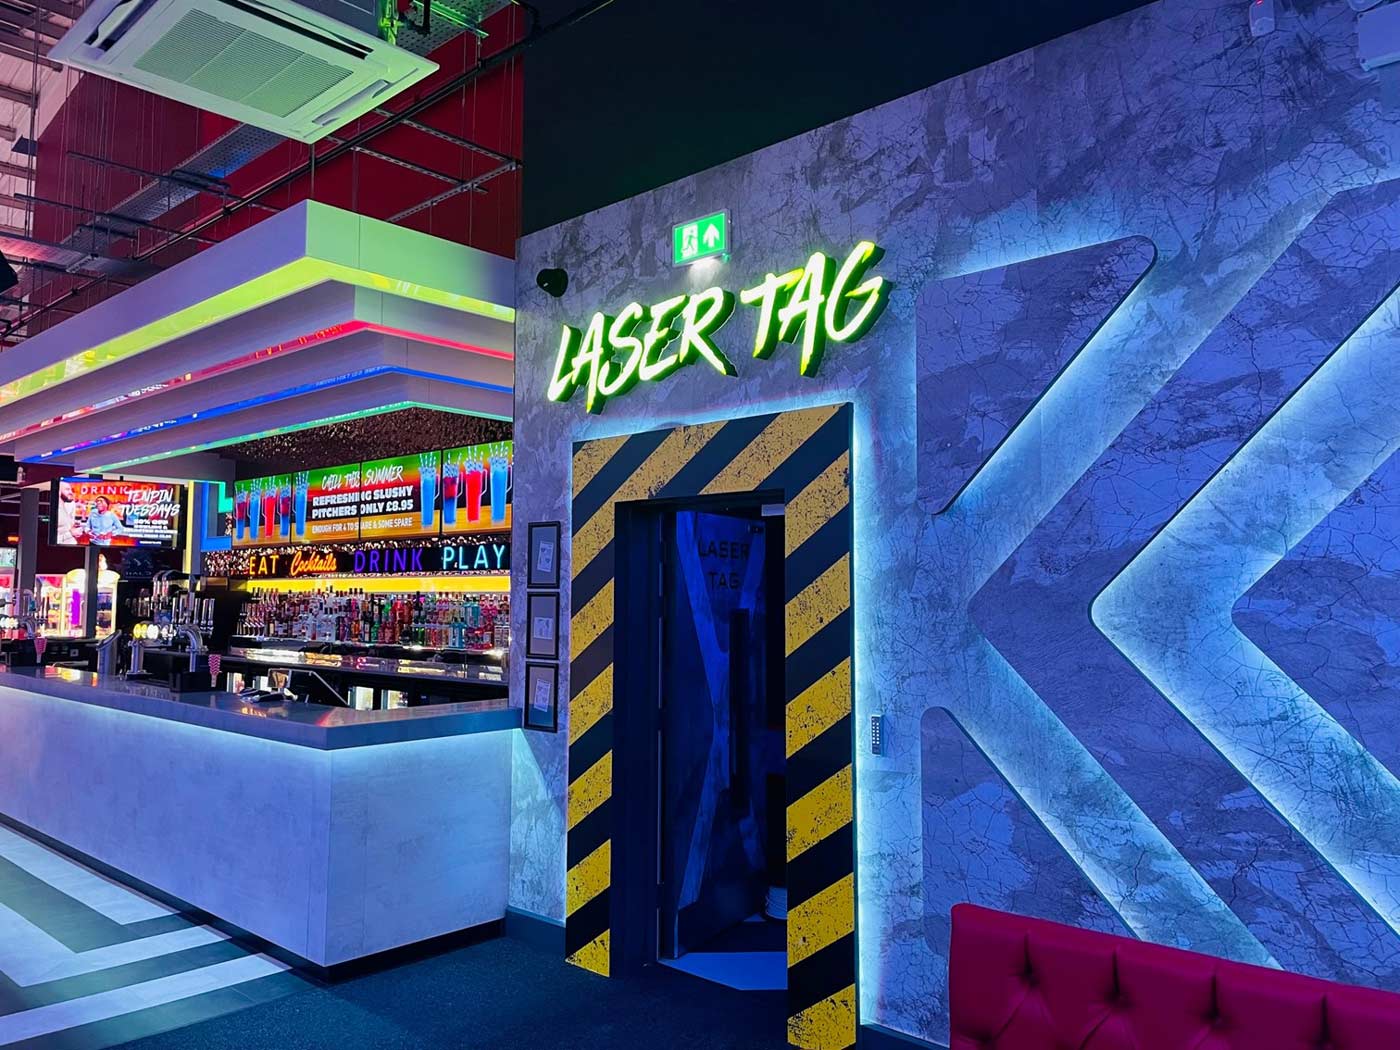 Dundee Bar And Laser Tag